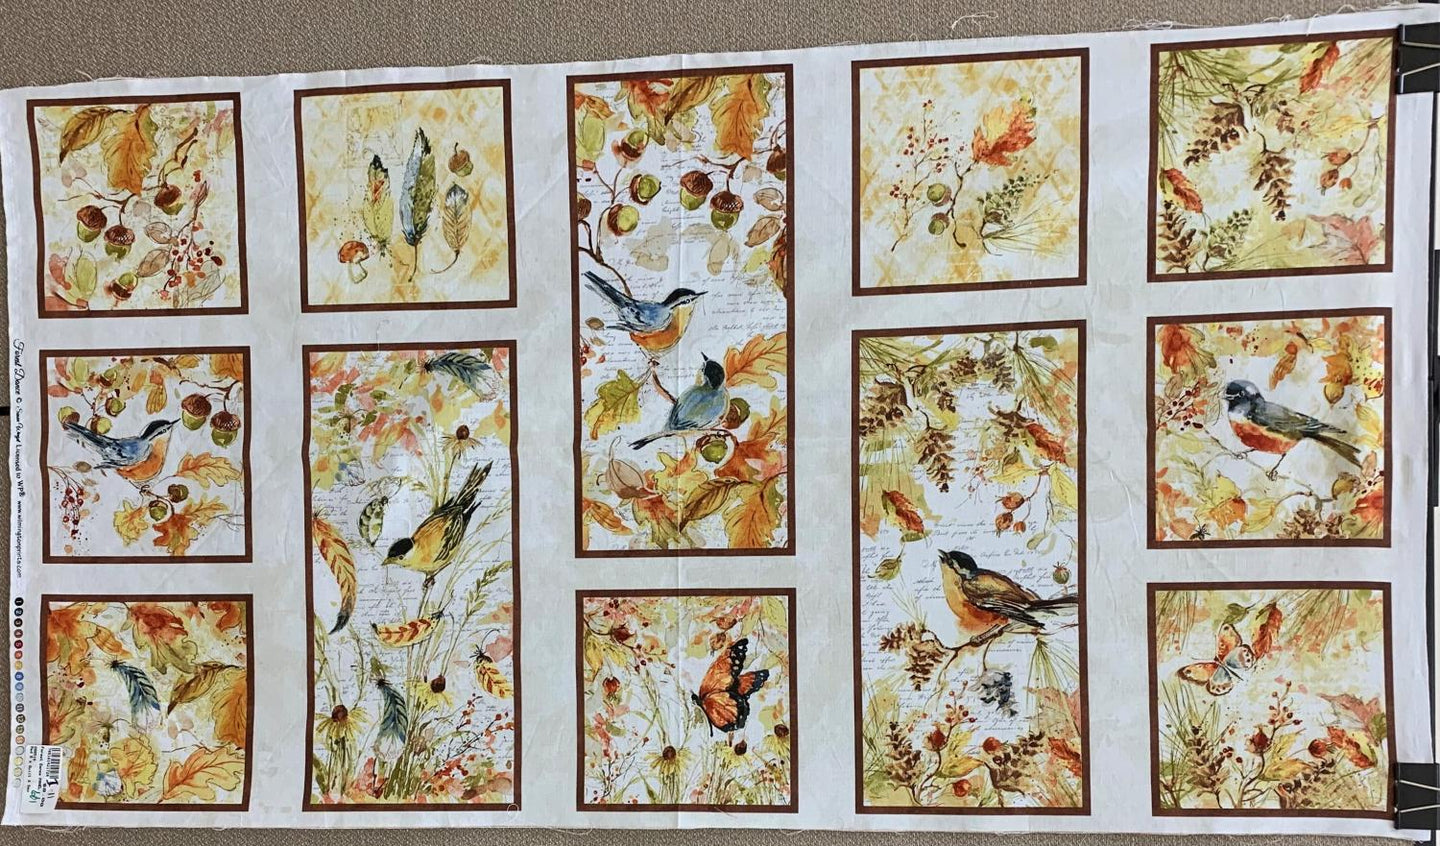 You can imagine yourself in the forest with this panel. Several blocks of different forest birds can be made into a warm quilt or a table runner.